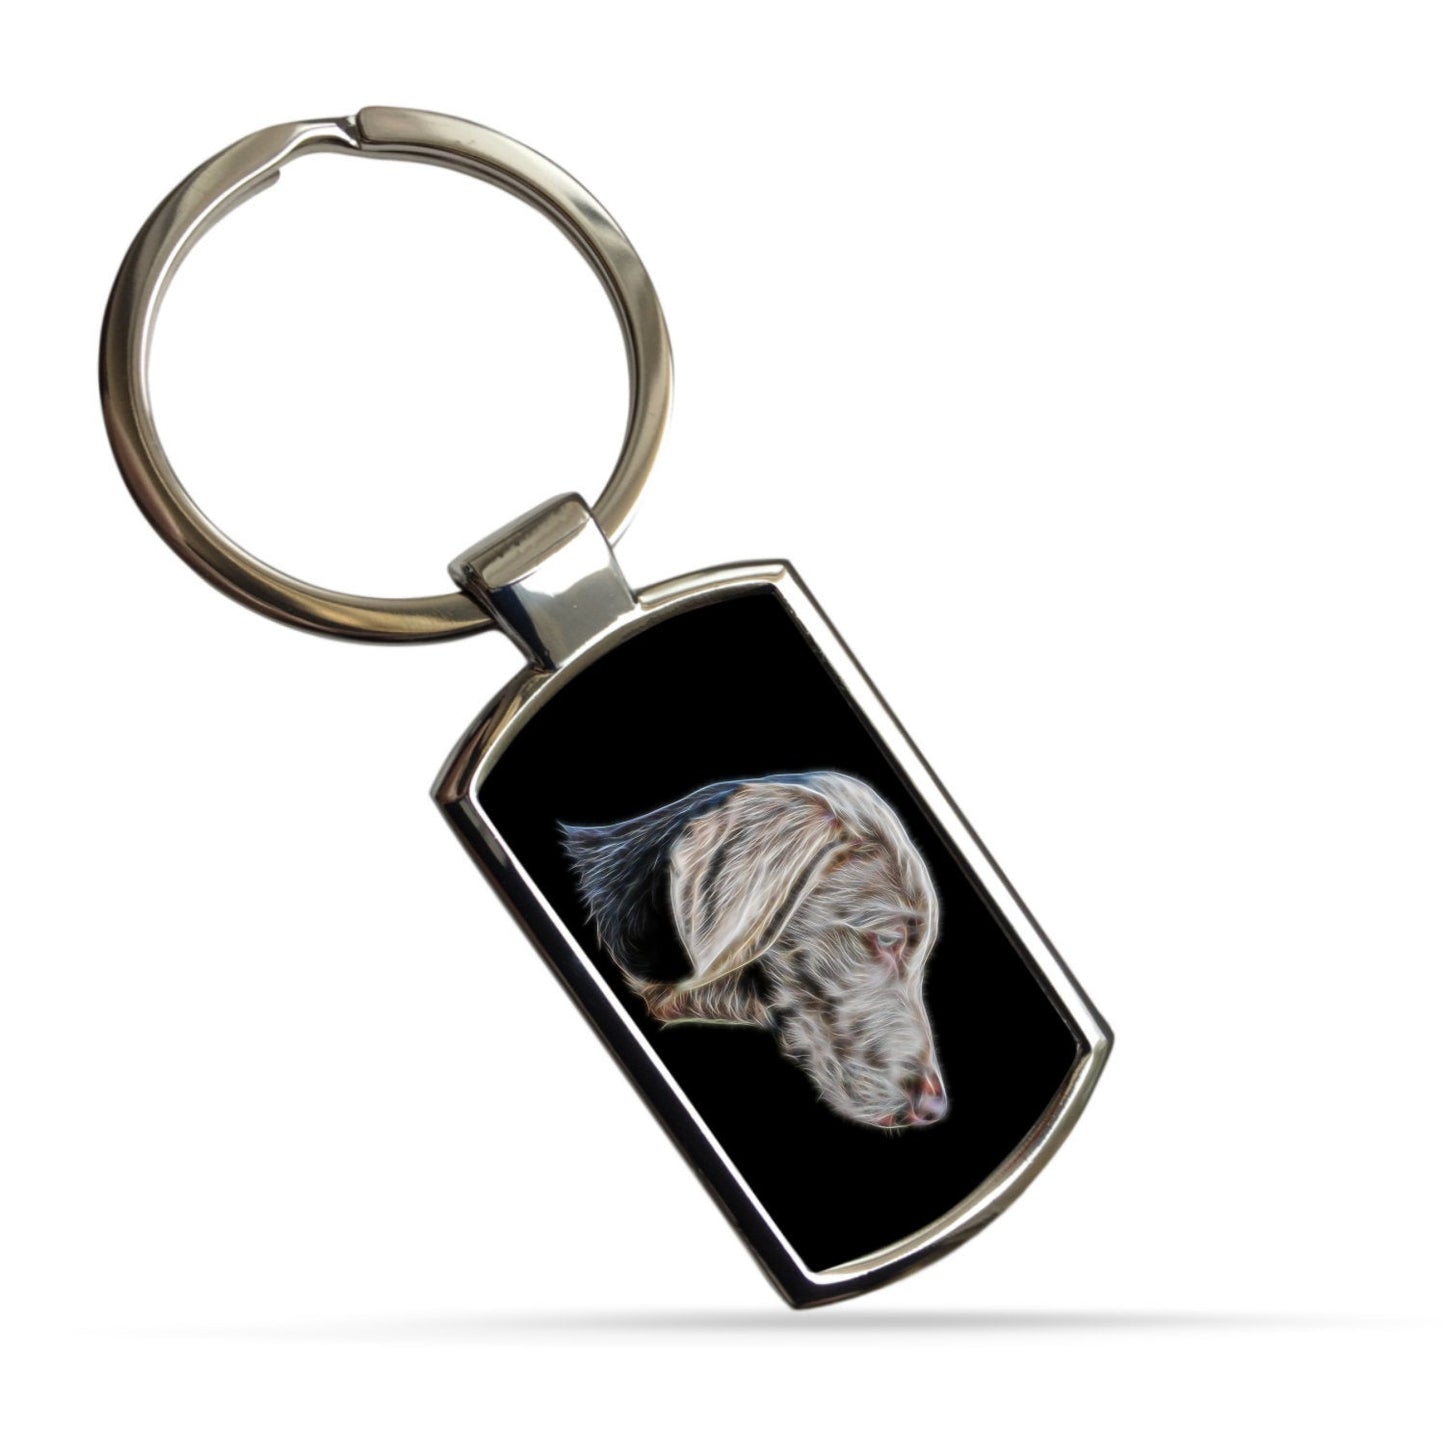 Weimaraner Keychain with Stunning Fractal Art Design. A Perfect Gift for Dog Lover.